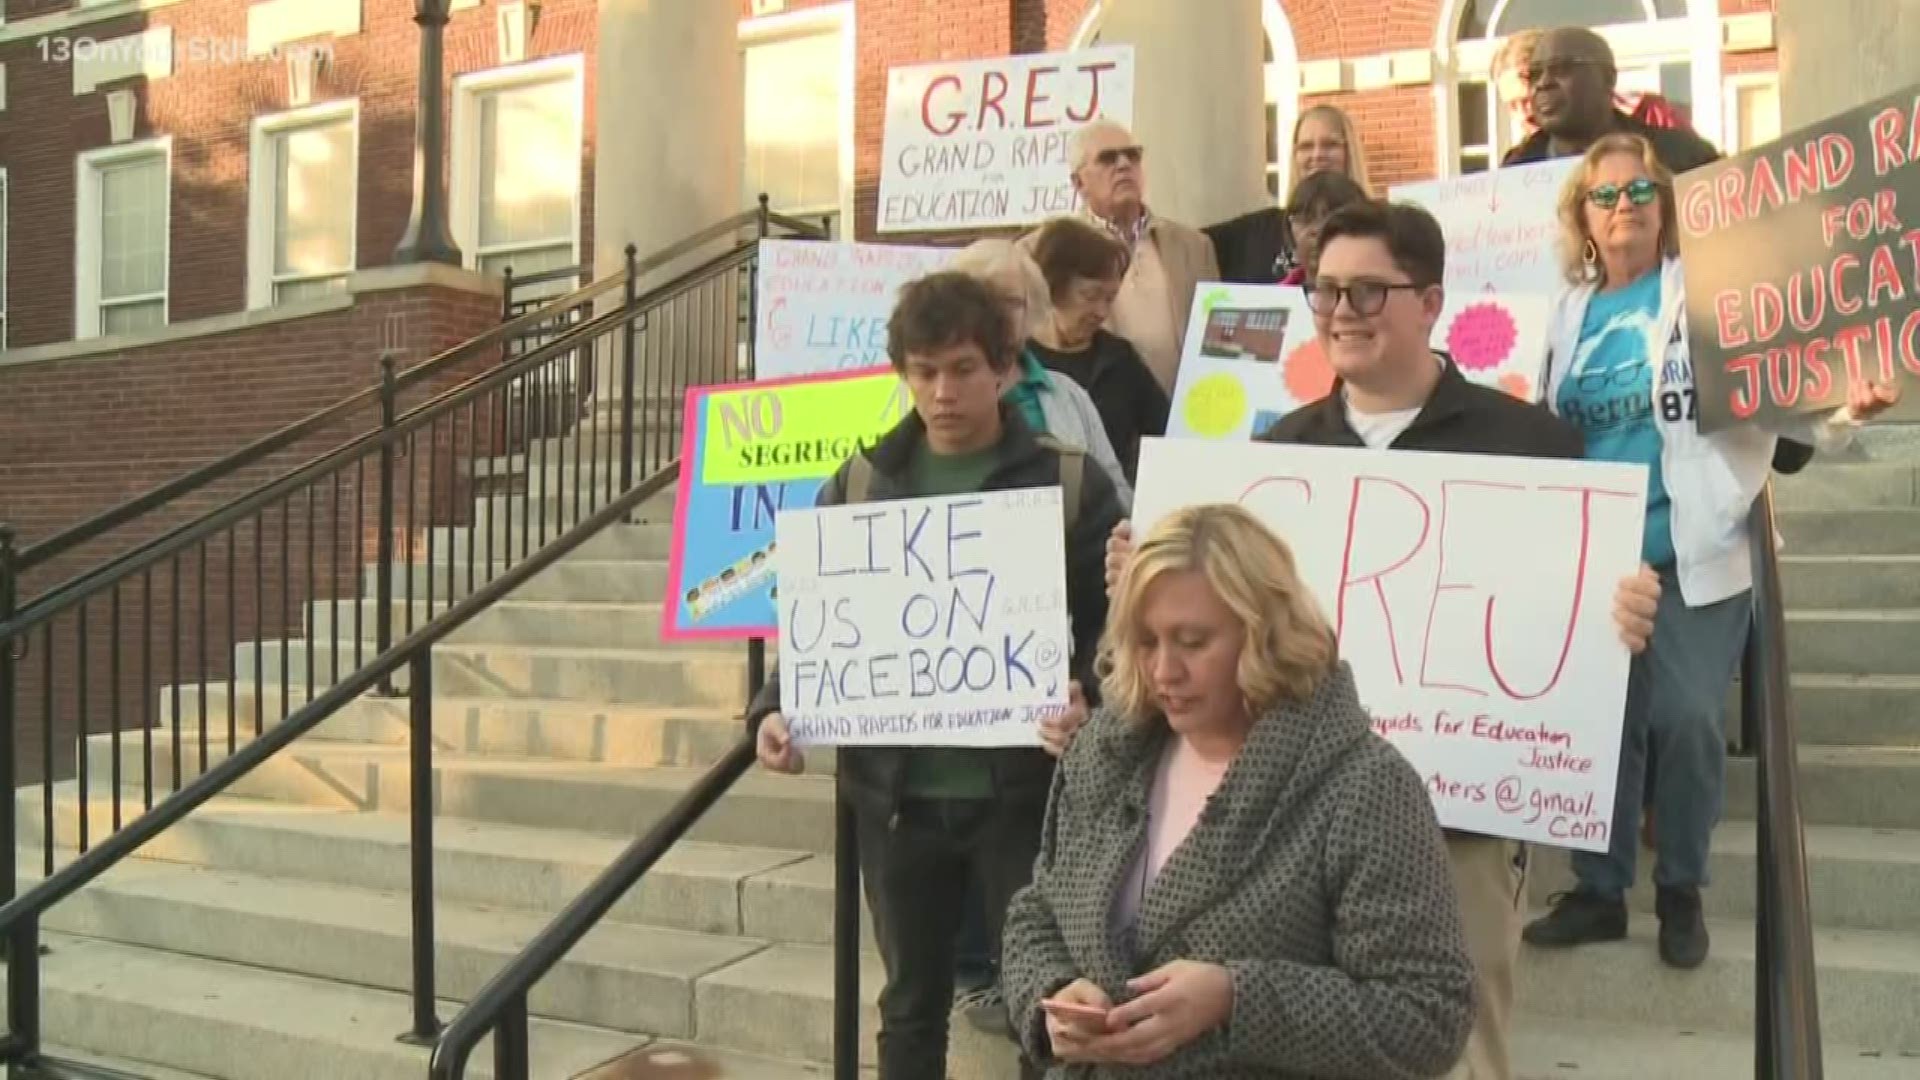 Grand Rapids parents were picketing Monday night, saying not all students in the area are getting an equal education.